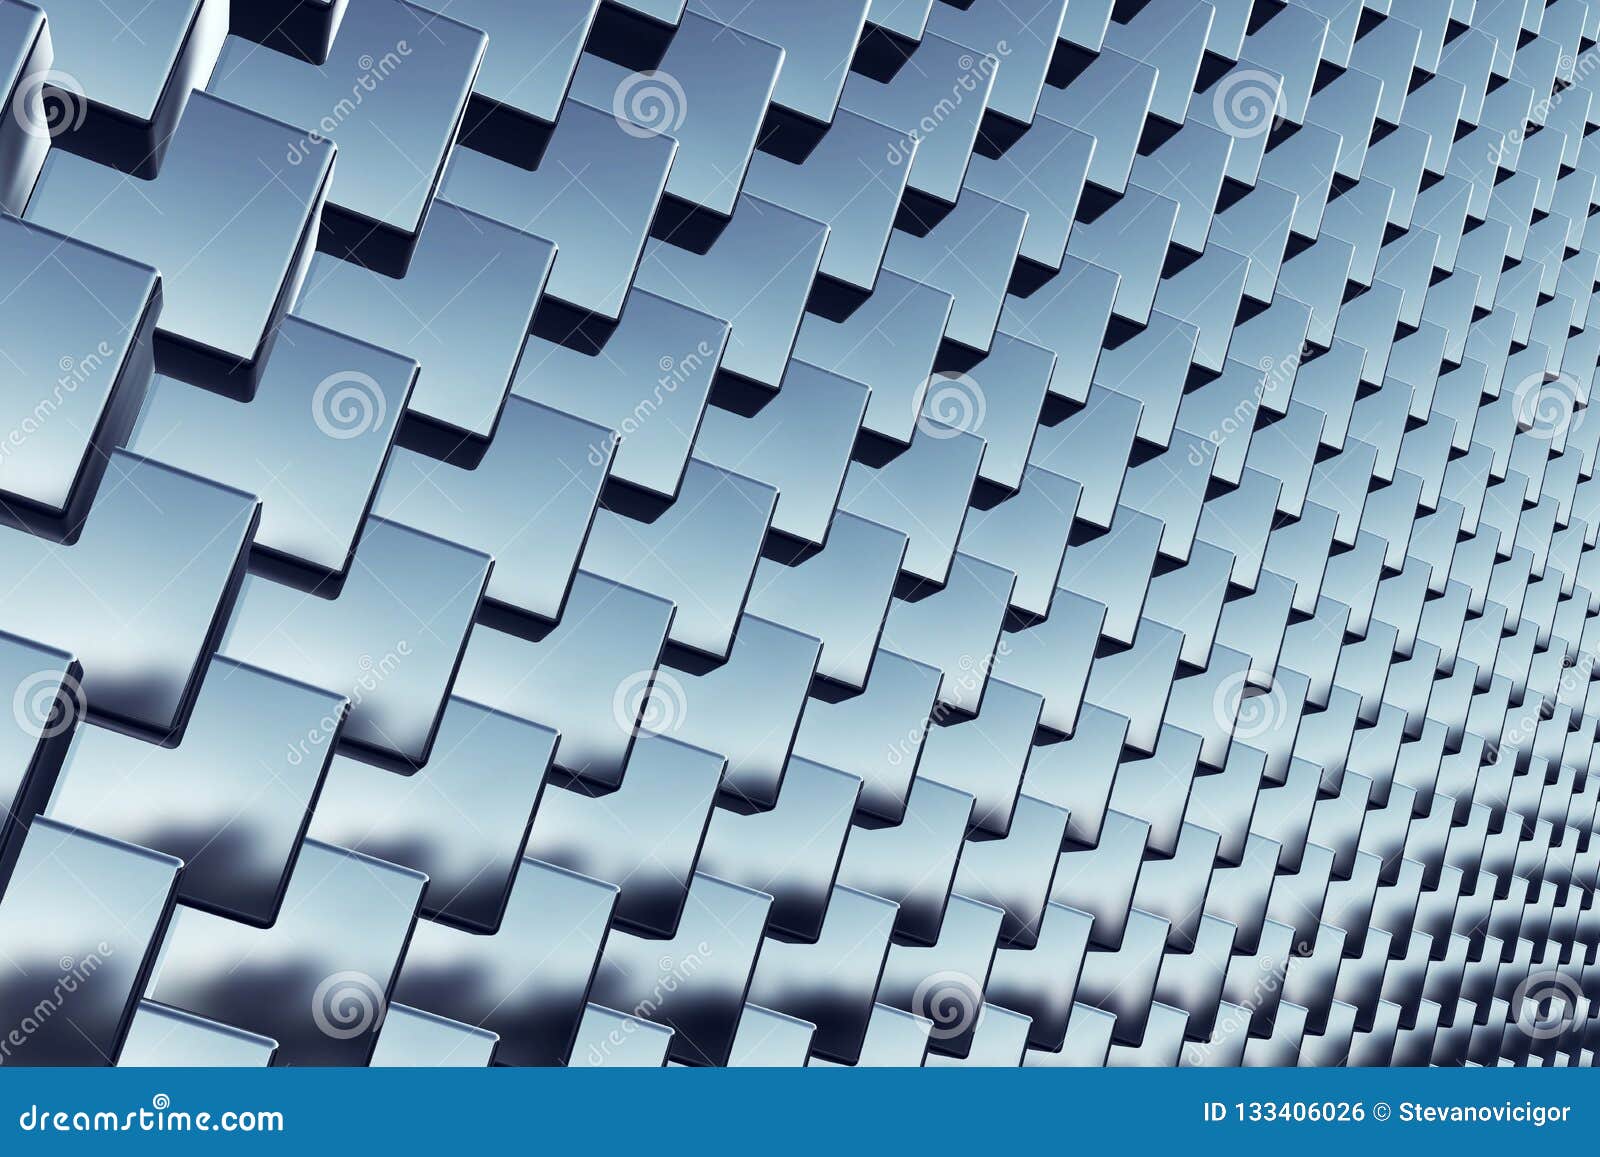 Cubes Array As Abstract 3d Background Stock Illustration - Illustration ...